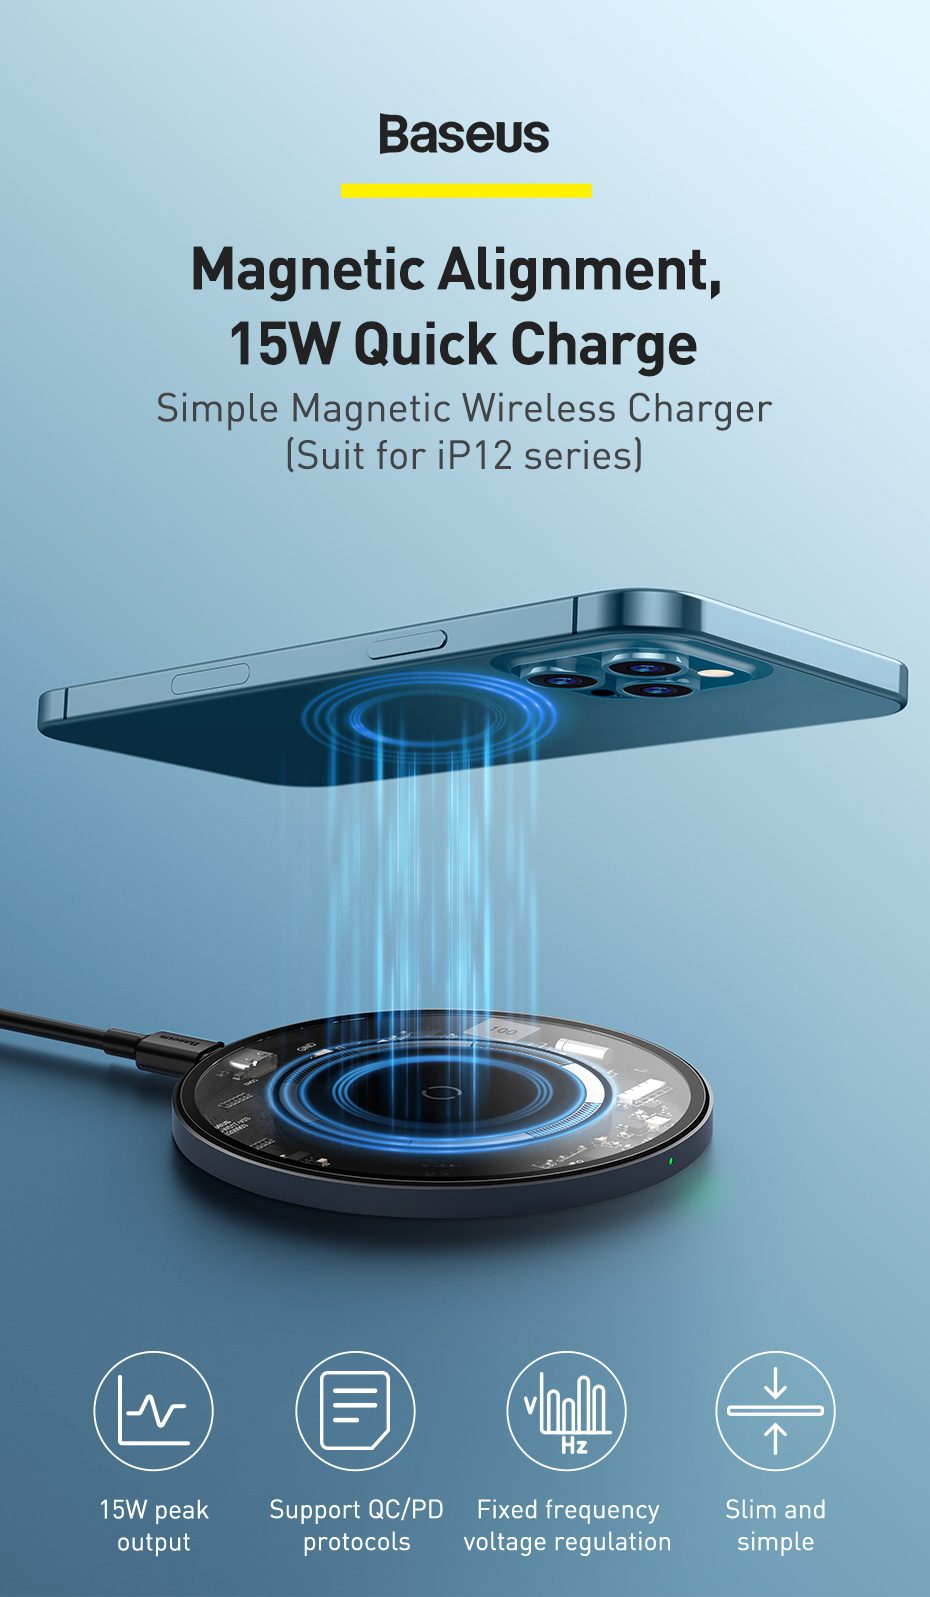 Baseus--15W-Magnetic-Wireless-Charger-PD-QC-Fast-Wireless-Charging-Pad-Aluminum-AlloyTempered-Glass--1757499-1